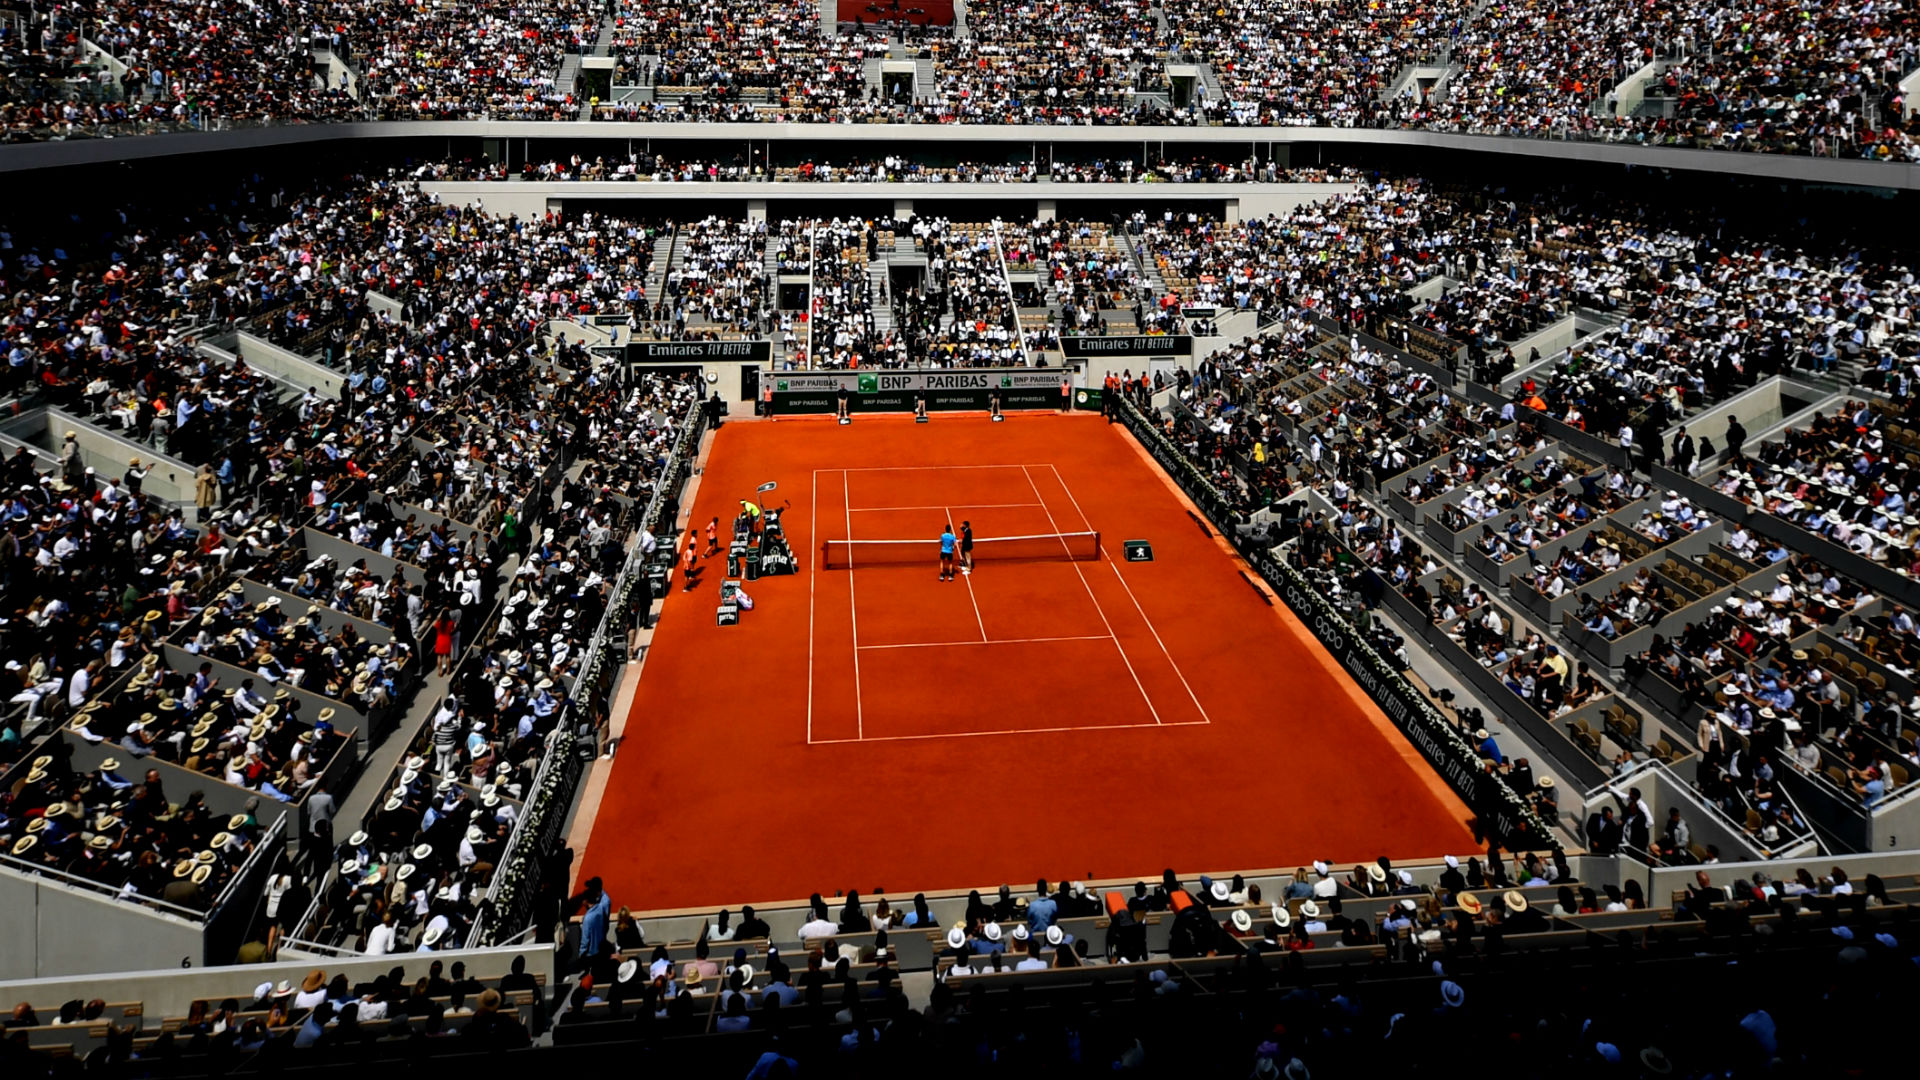 With France in a nationwide lockdown, the decision has been taken to shift the start of the French Open to May 30.